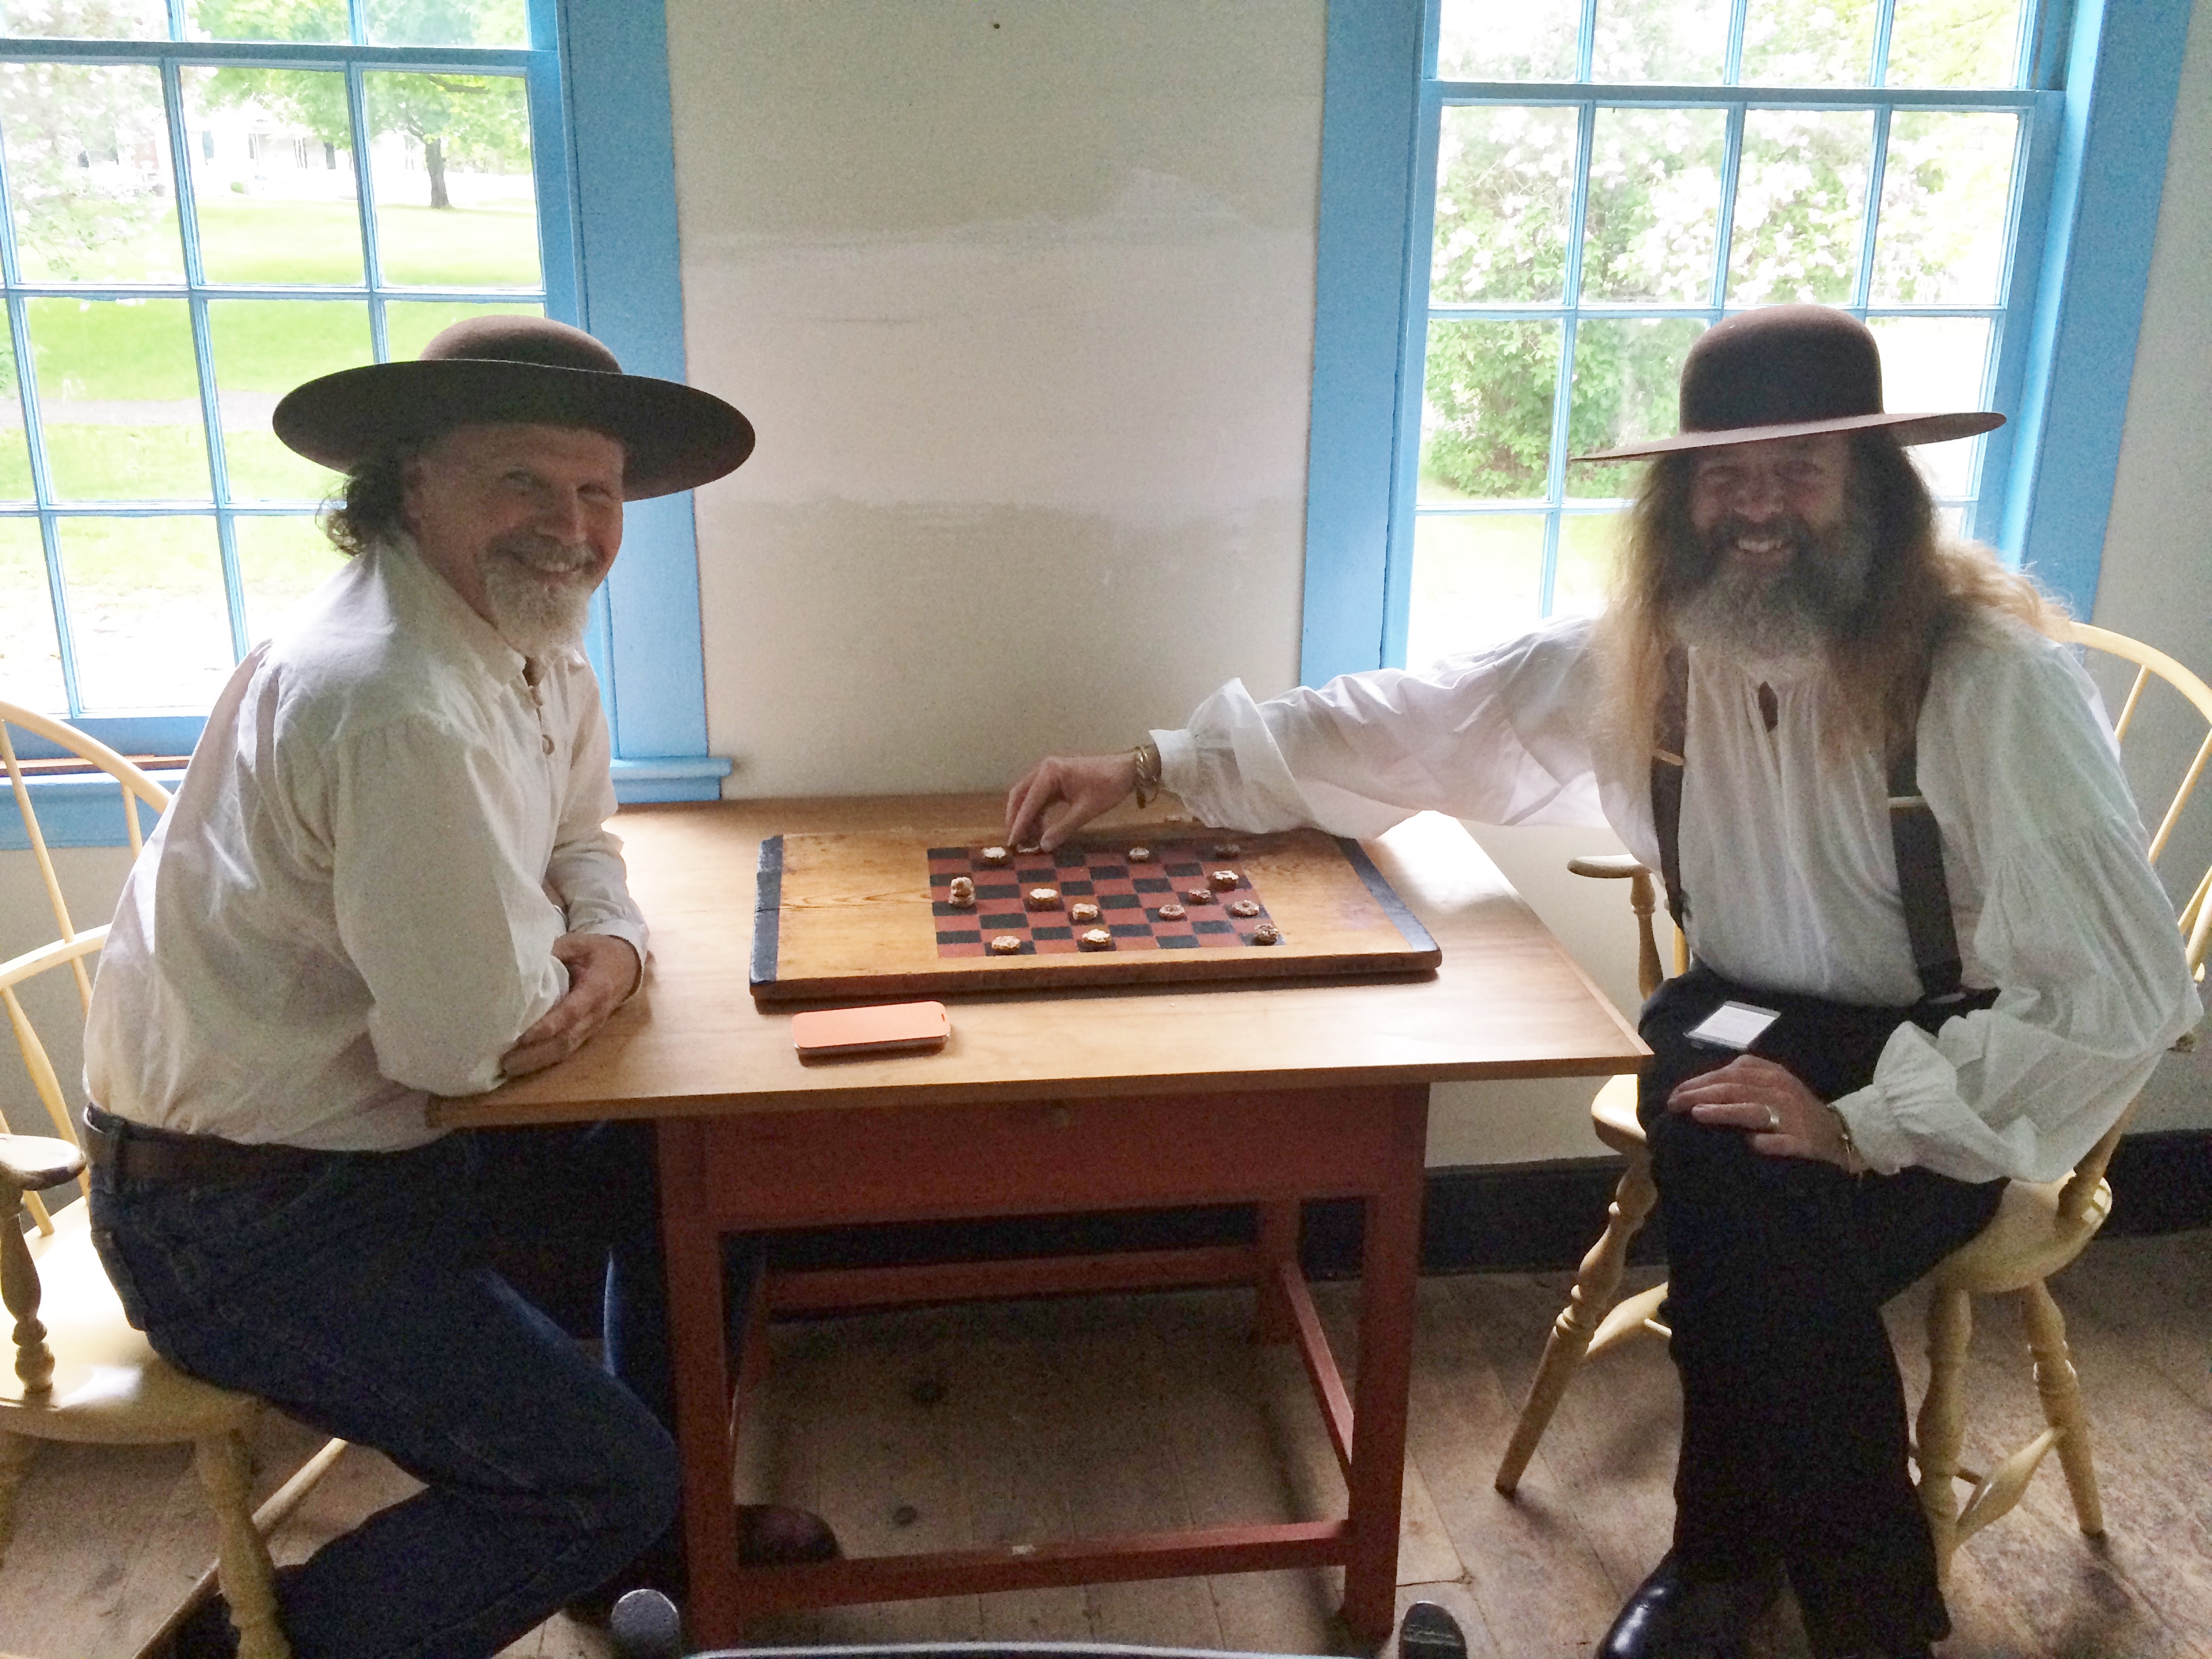 We later found out these guests were the Bridgewater Folk Duo who've been singing period music at historic sites for over 15 years!